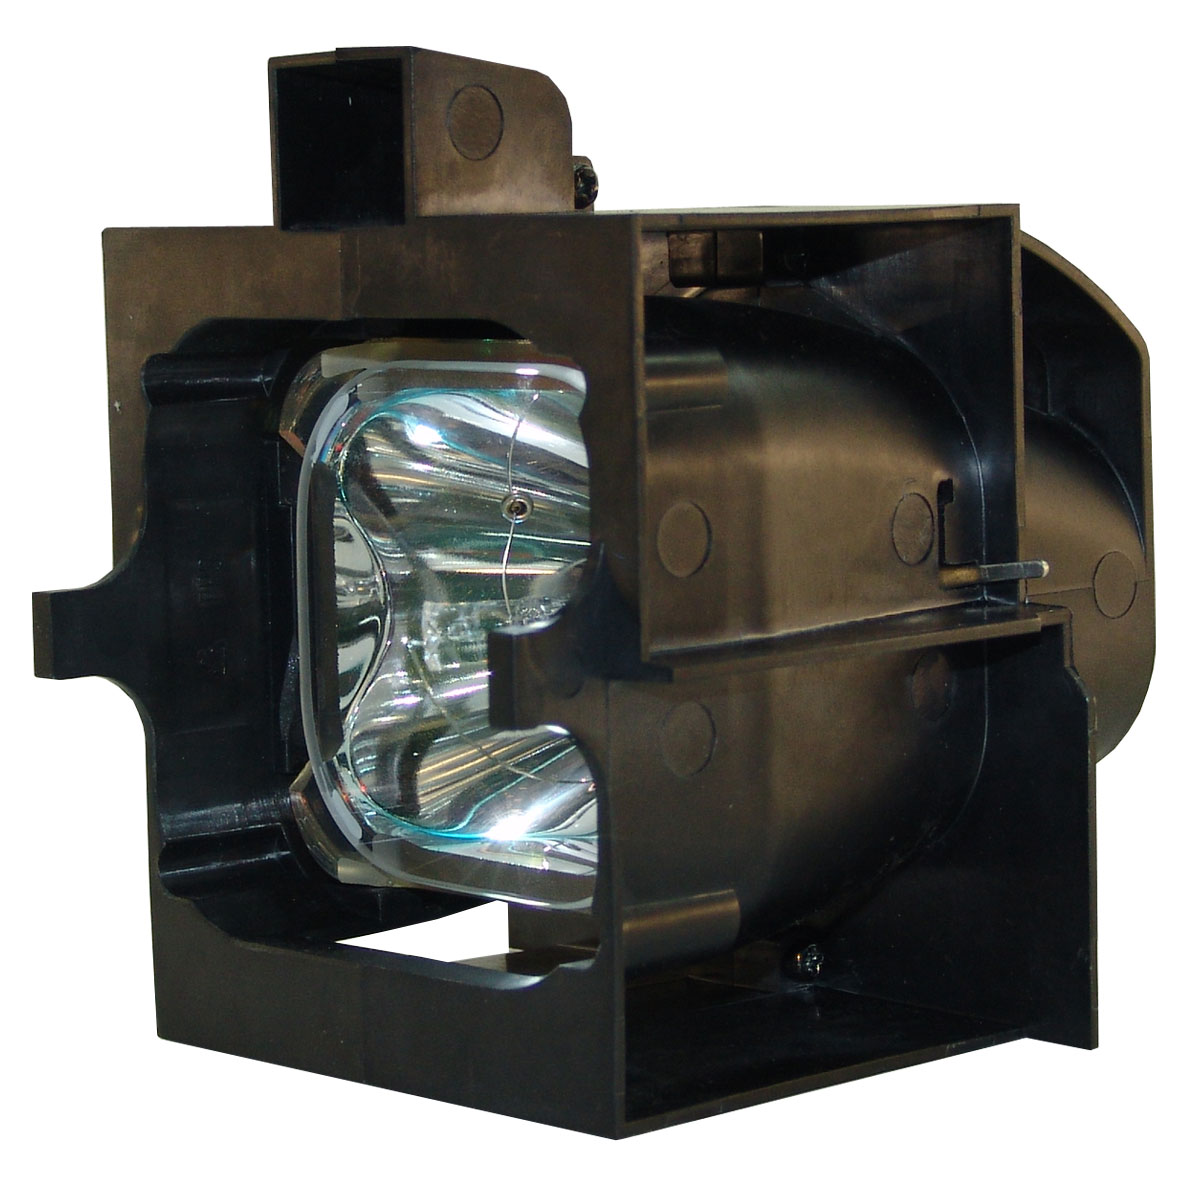 Buyquest iCon H250 Single  OEM Replacement Projector Lamp for Barco. Includes New UHP 250W Bulb and Housing